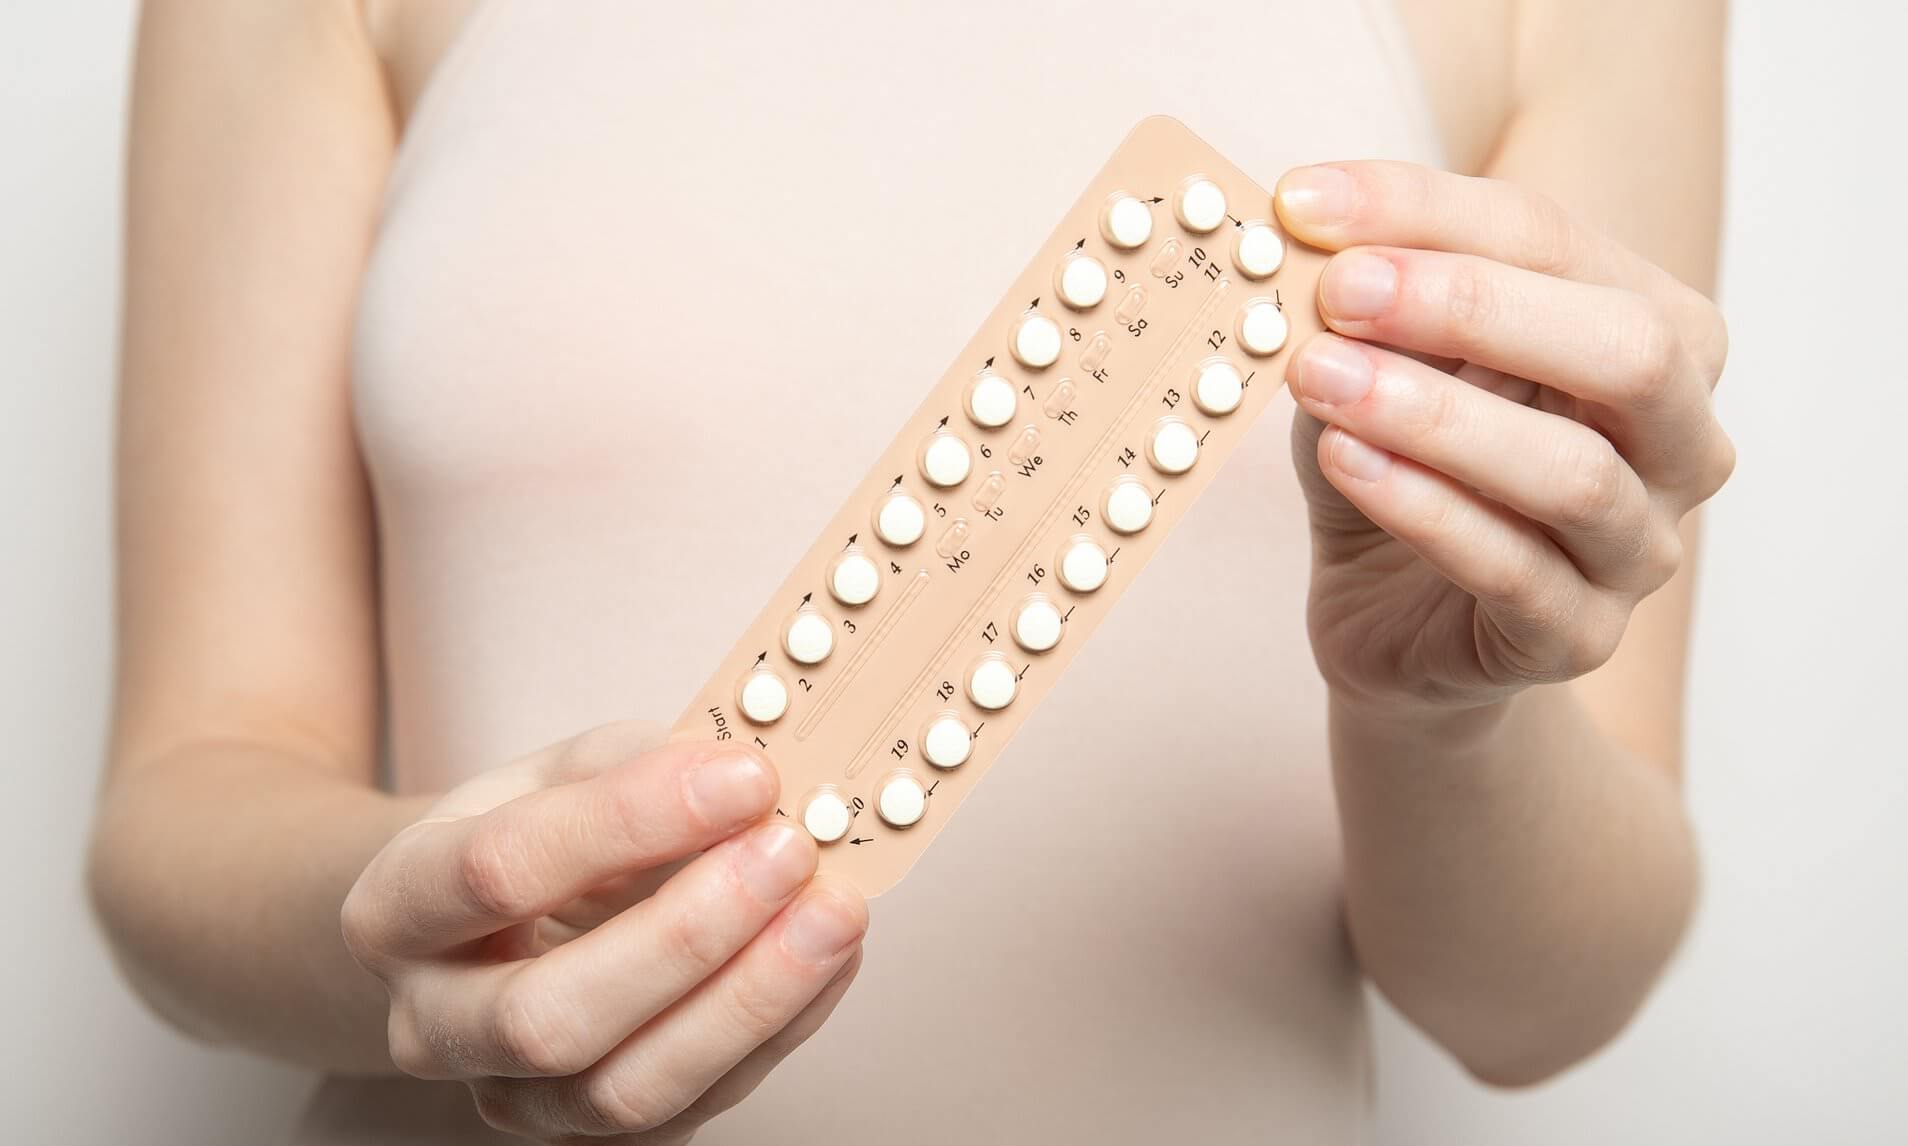 Study Finds a 73% Increase in Depression Risk Linked to Combined Contraceptive Pill Use